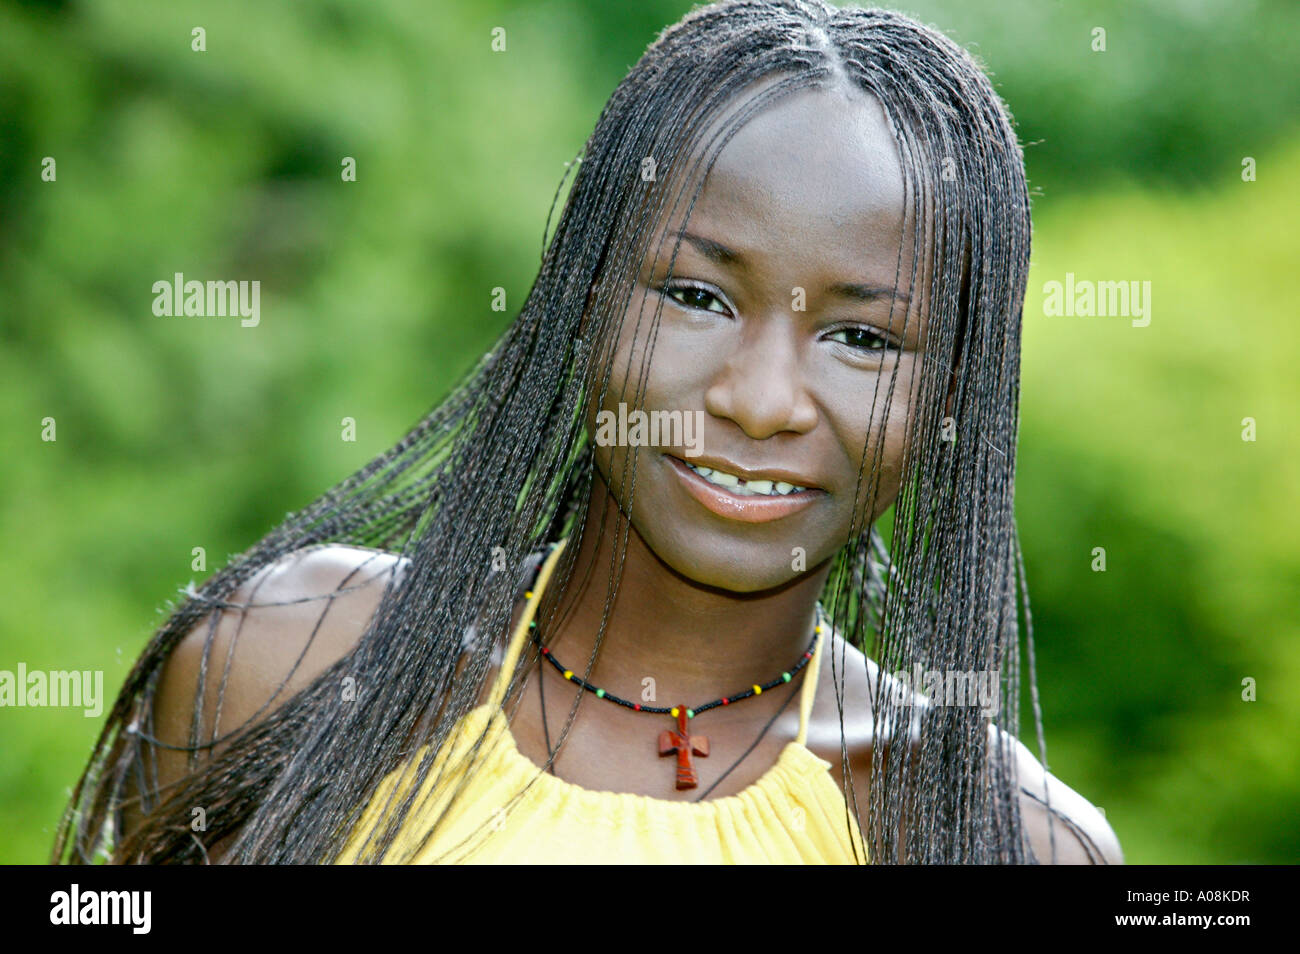 Farbiges Maedchen im Freien Studentin, young black woman Stock Photo